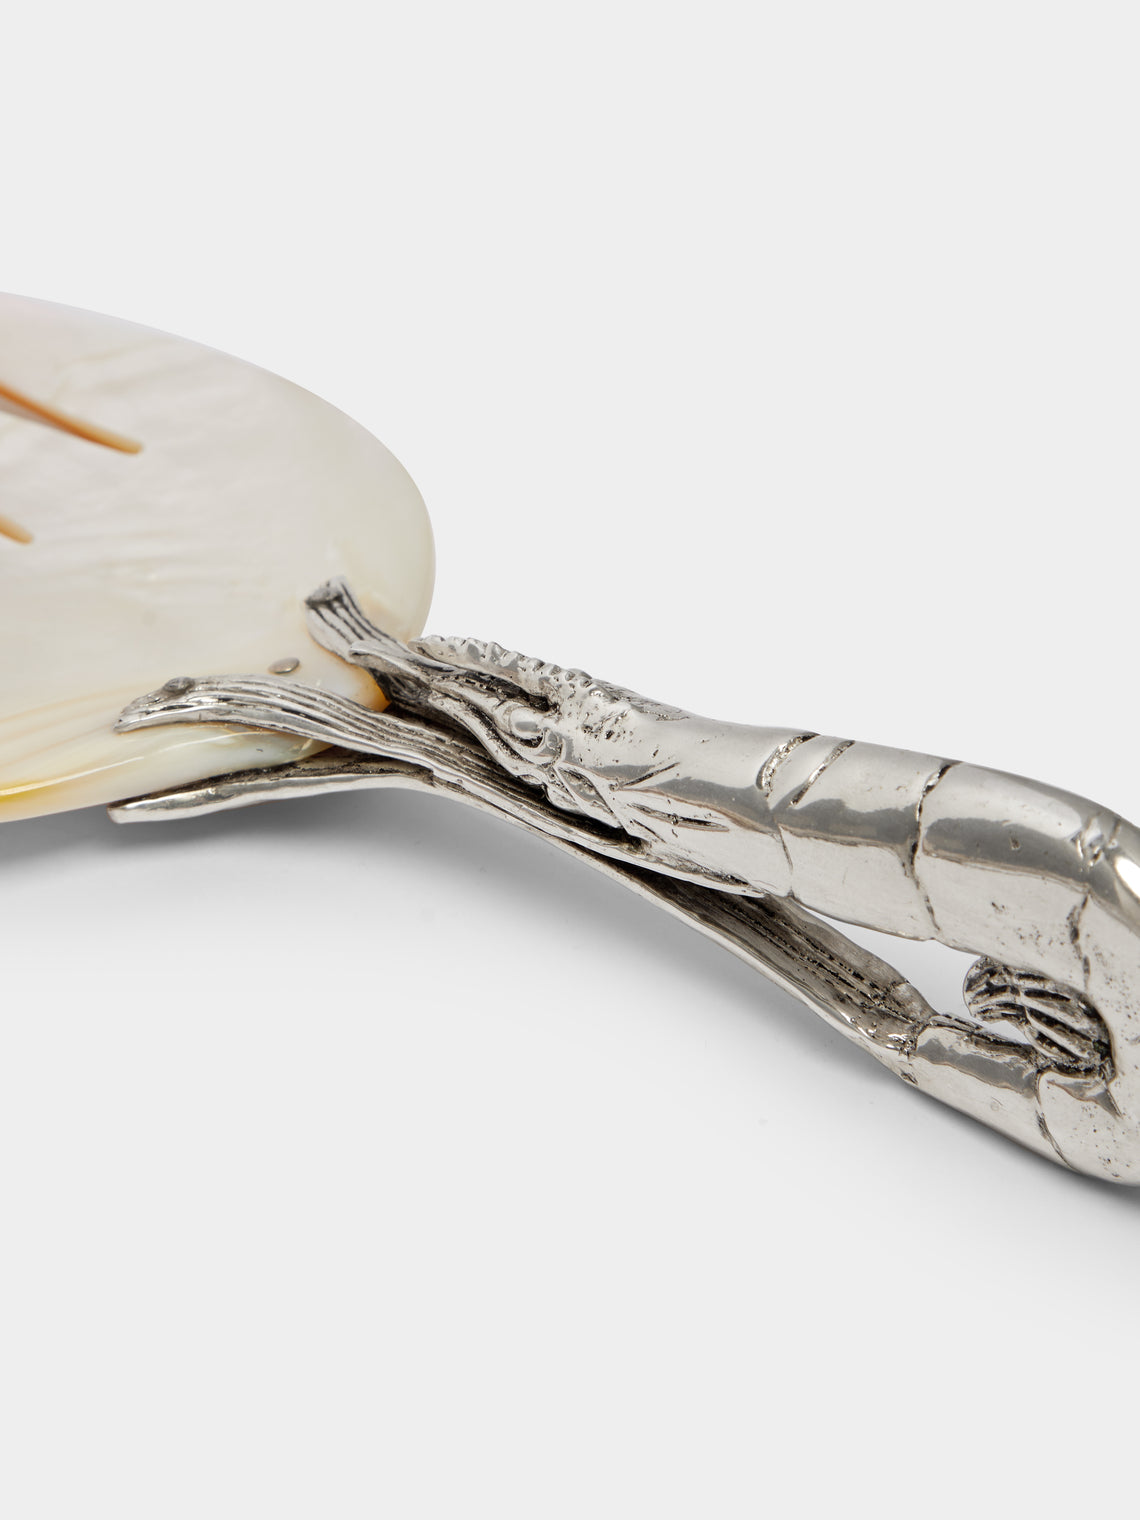 Objet Luxe - Silver-Plated and Mother-of-Pearl Servers (Set of 2) -  - ABASK